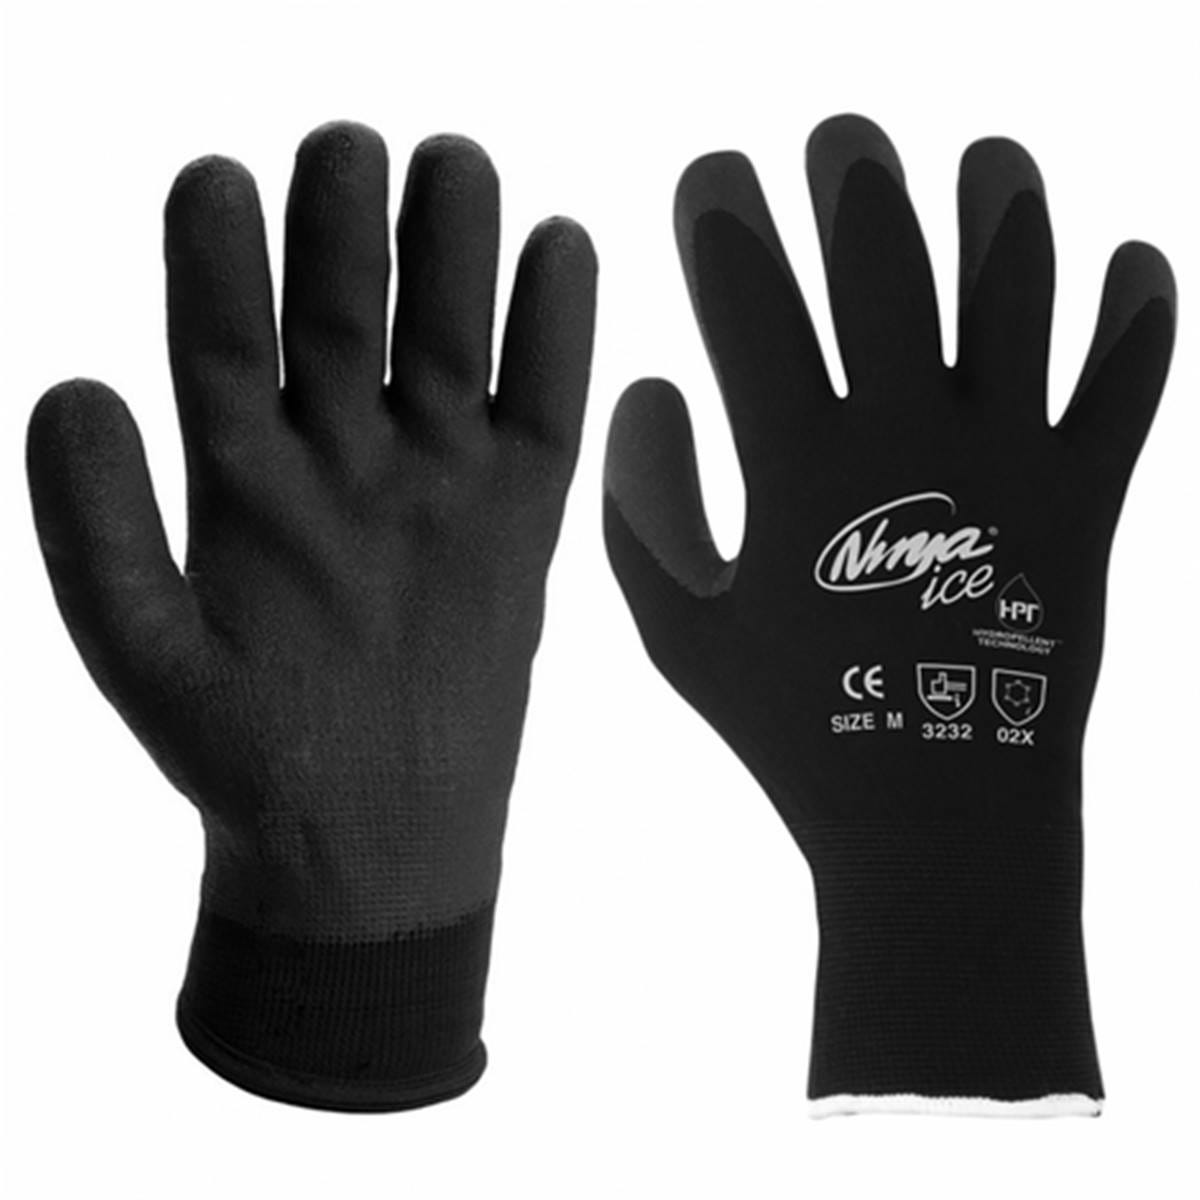 Gant pour le froid NINJA ICE SINGER SAFETY - VPA